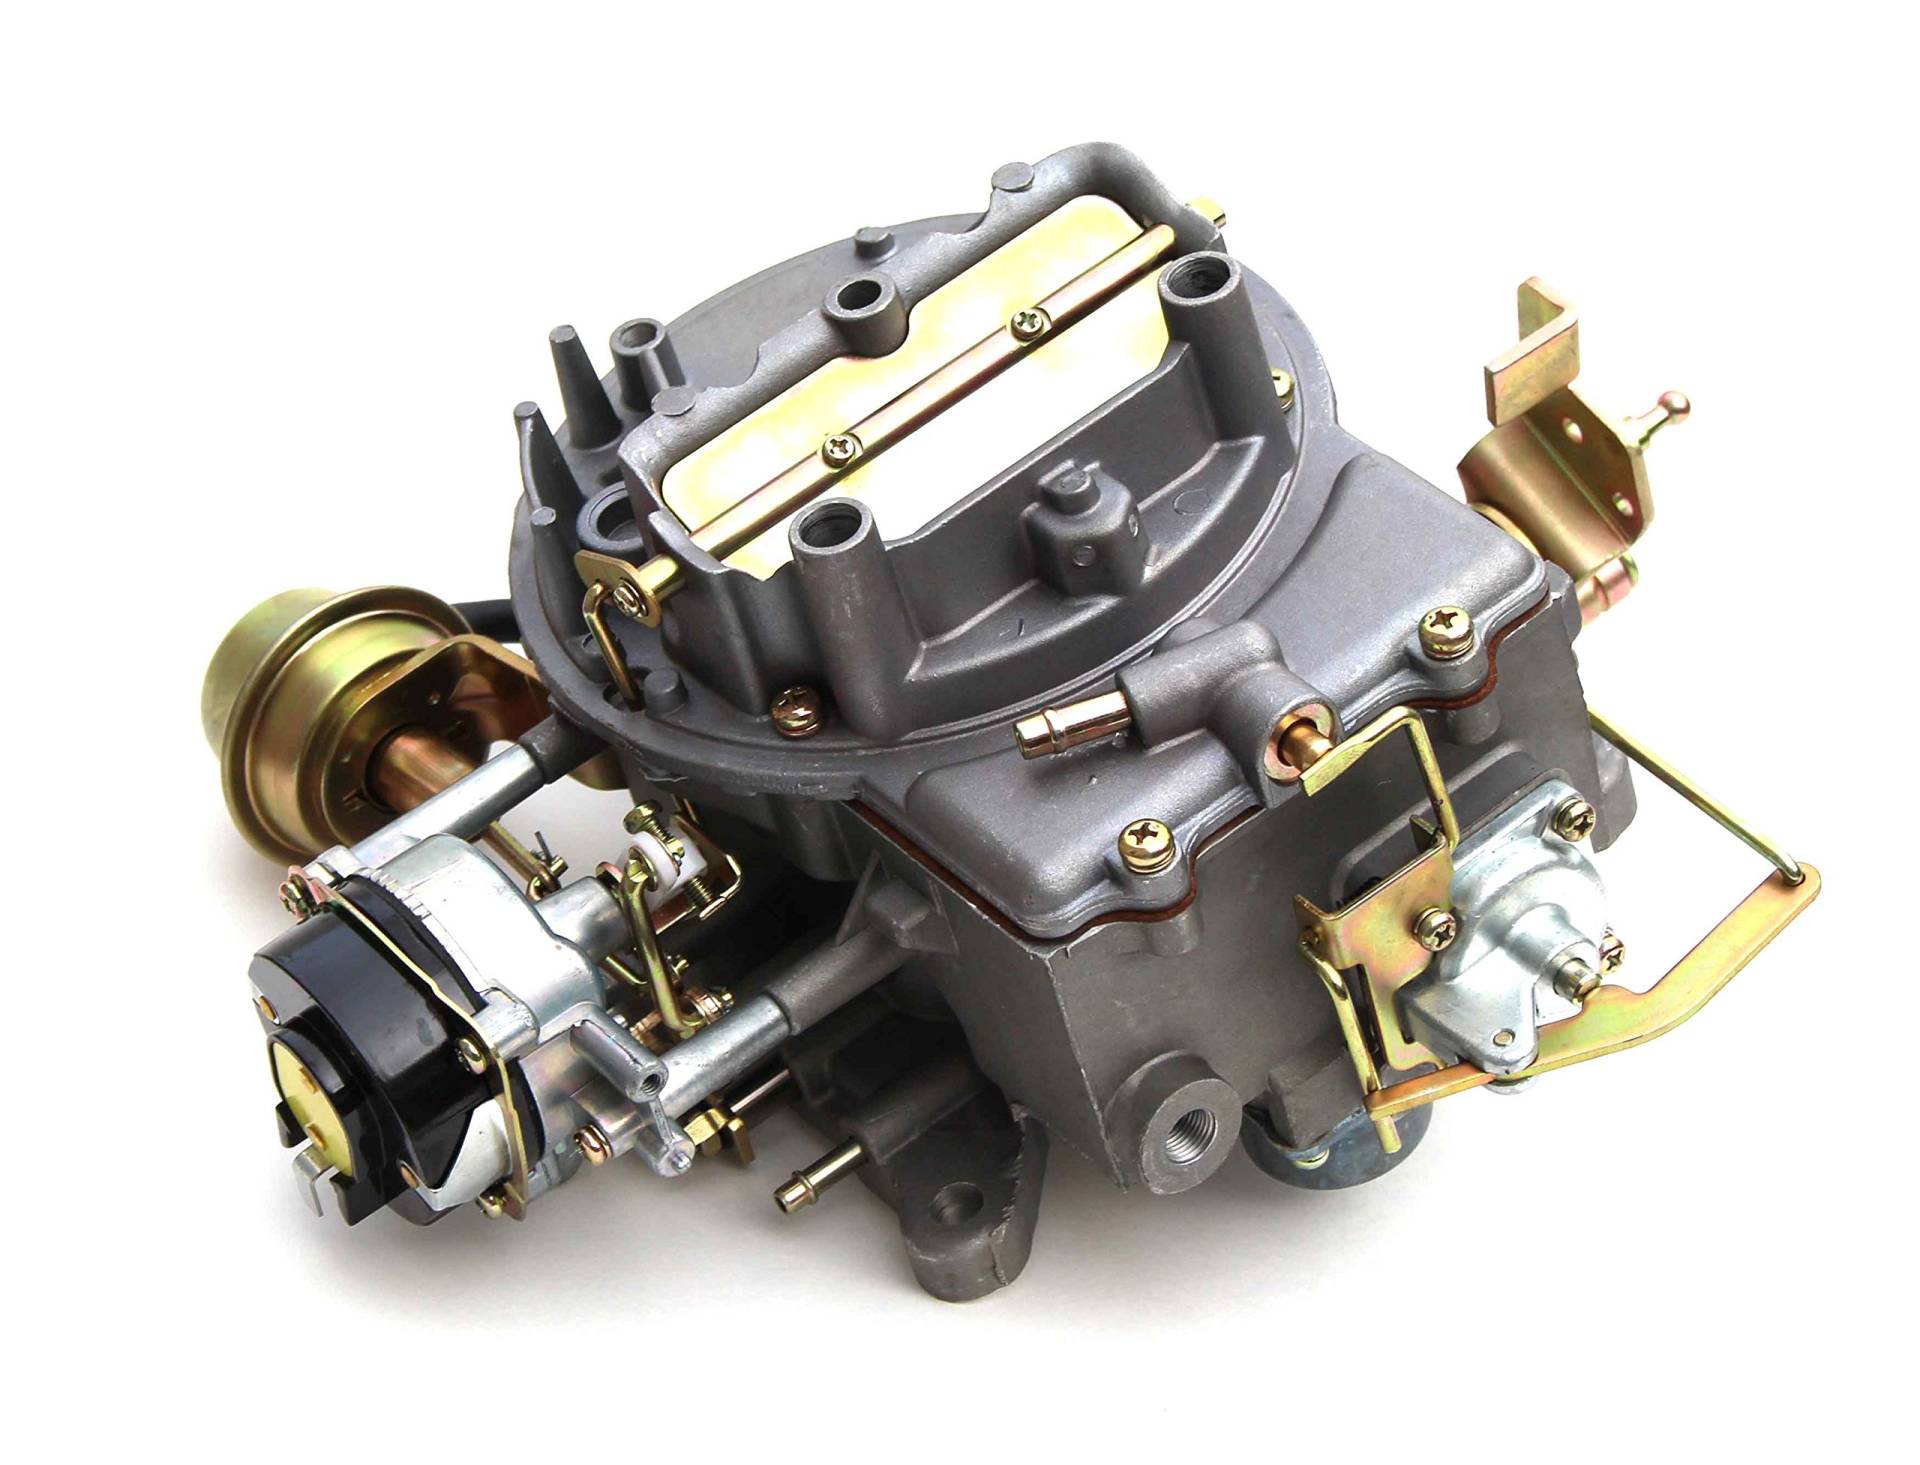 New Carburetor Two 2 Barrel Carburetor Carb 2100 2150 For Ford 289 302 351 Cu Jeep Engine with Electric Choke von Auto Parts Prodigy